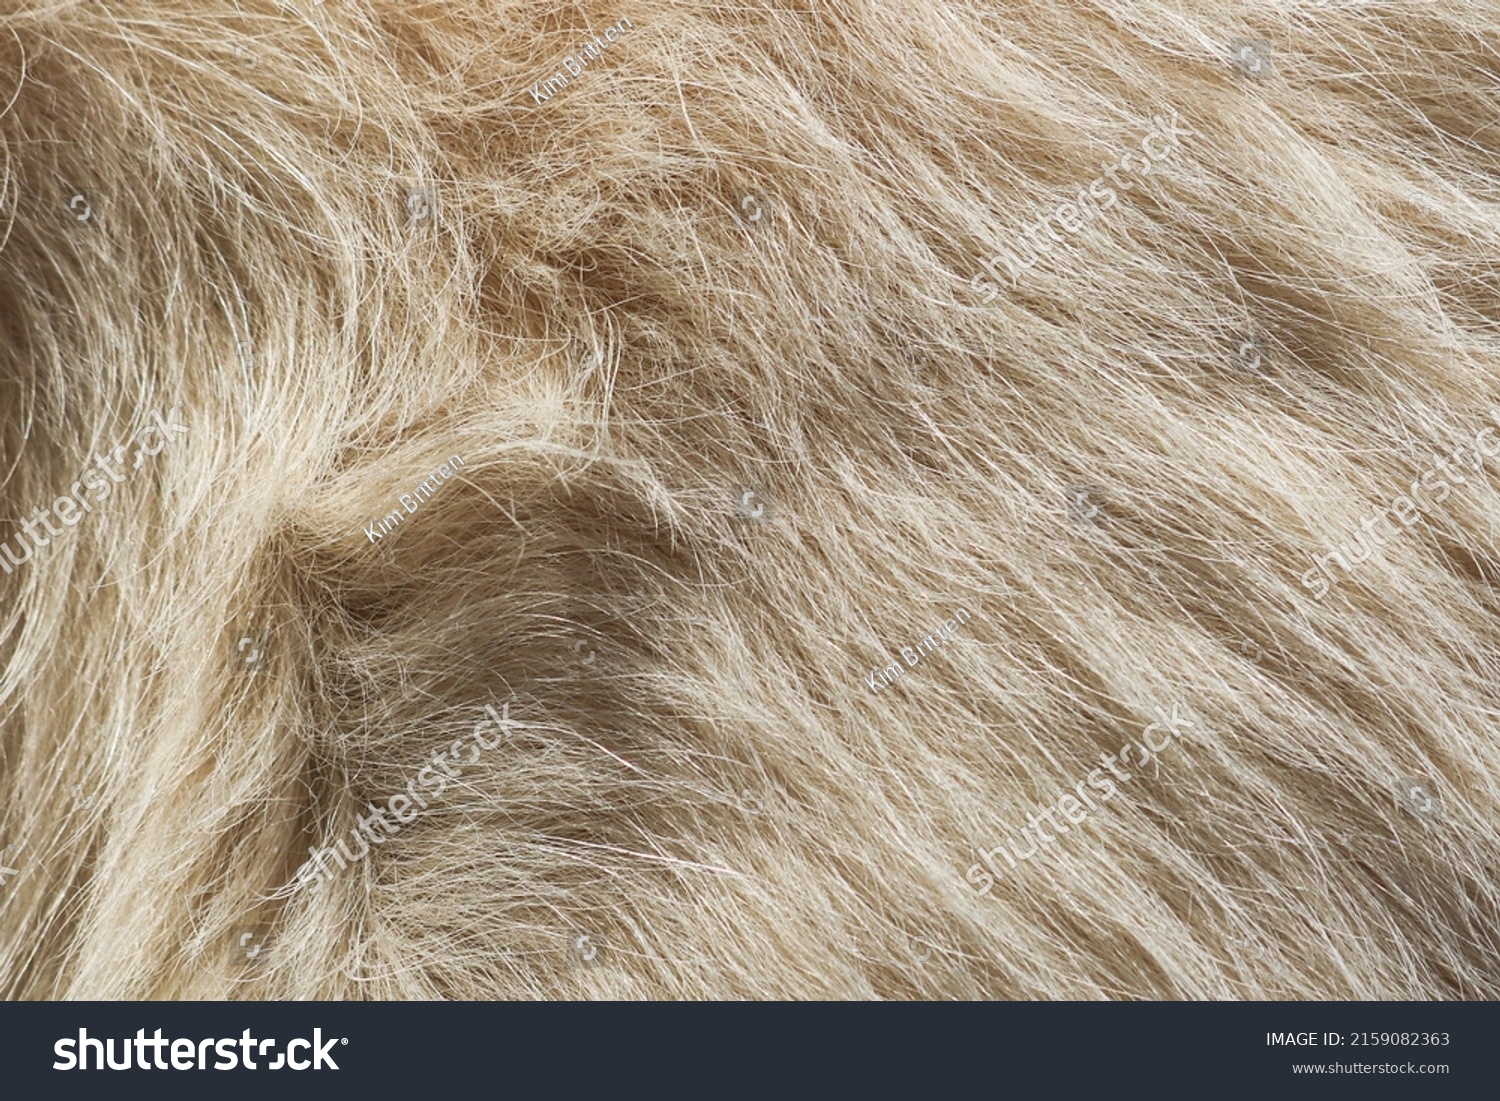 cream coarse furry outer coat of a double coated golden retriever canine dog #2159082363